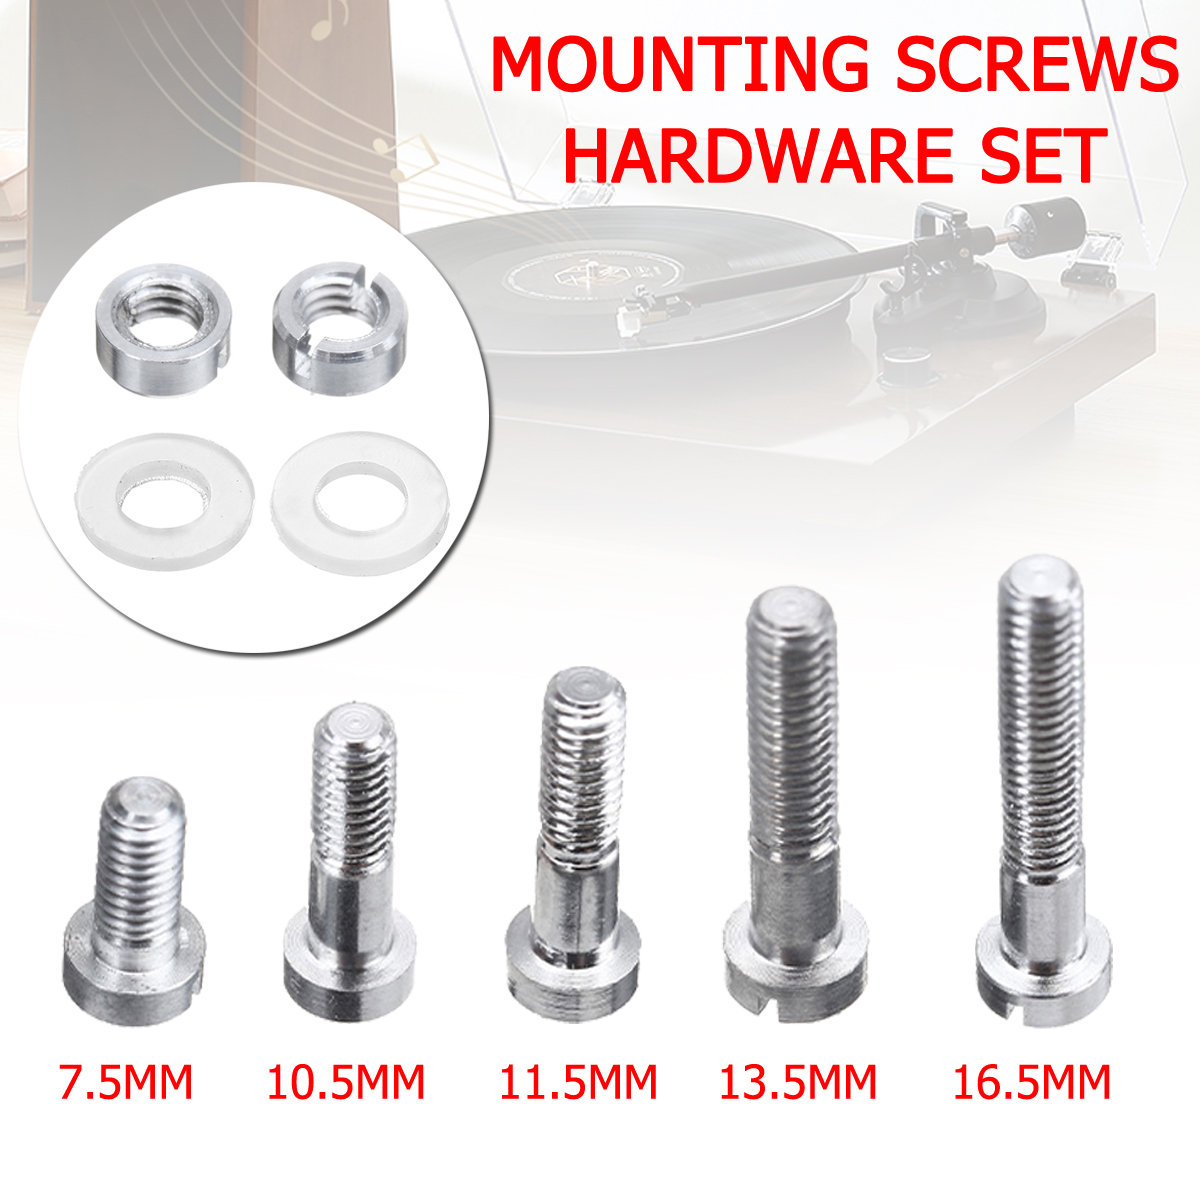 7.5mm/10.5mm/11.5mm/13.5mm/16.5mm M2.5mm Mounting Screw Set For Record Player 15